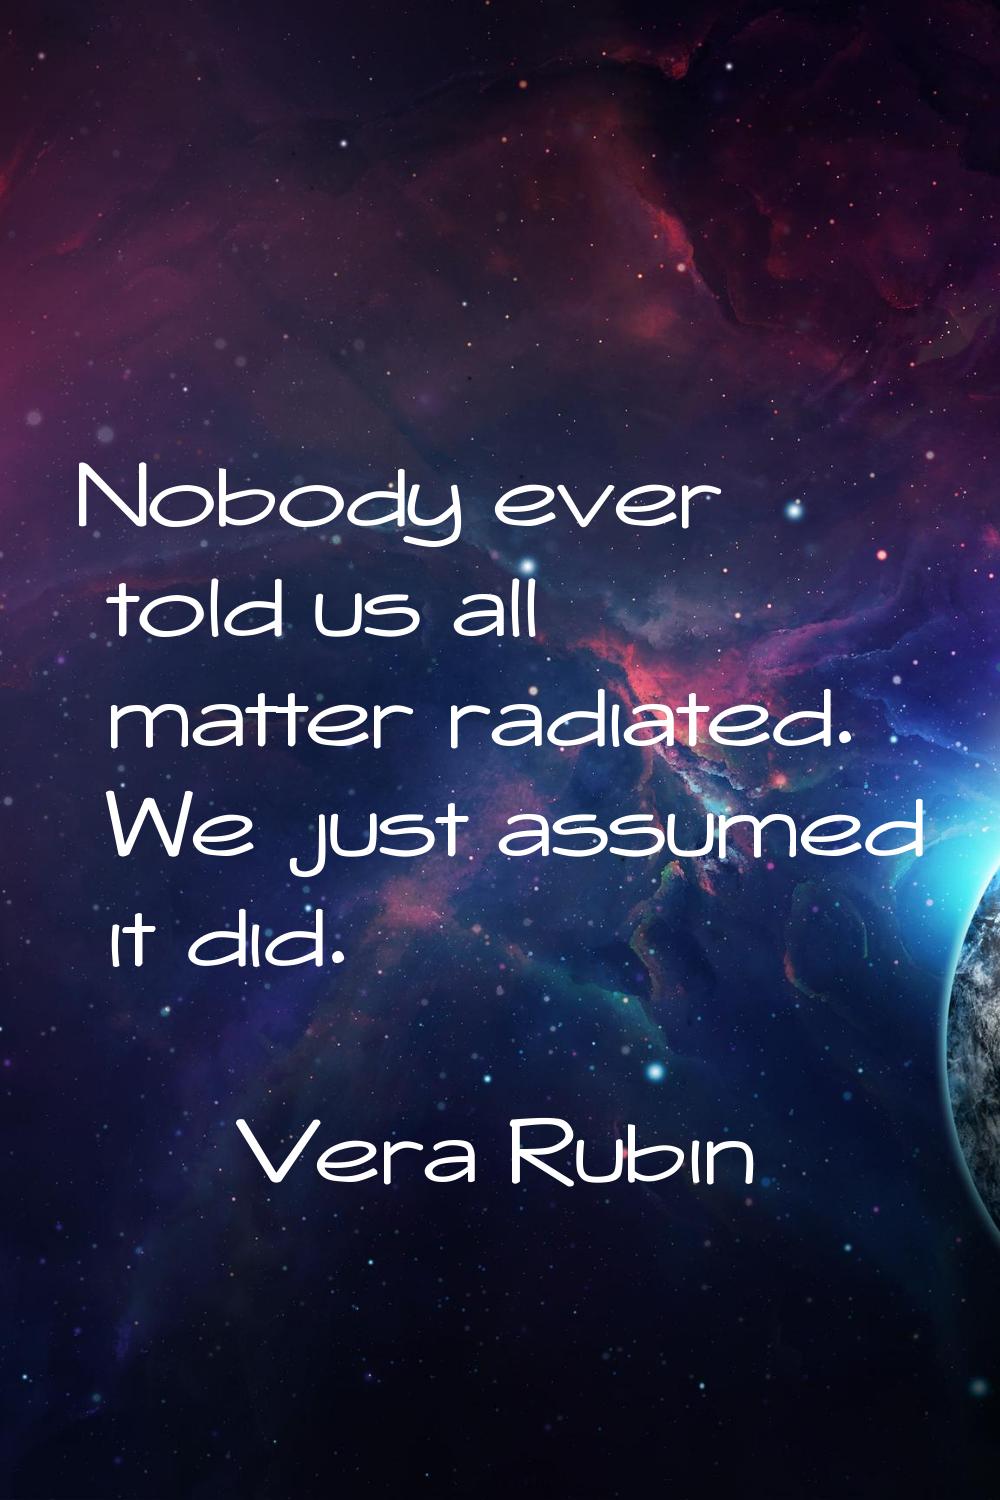 Nobody ever told us all matter radiated. We just assumed it did.